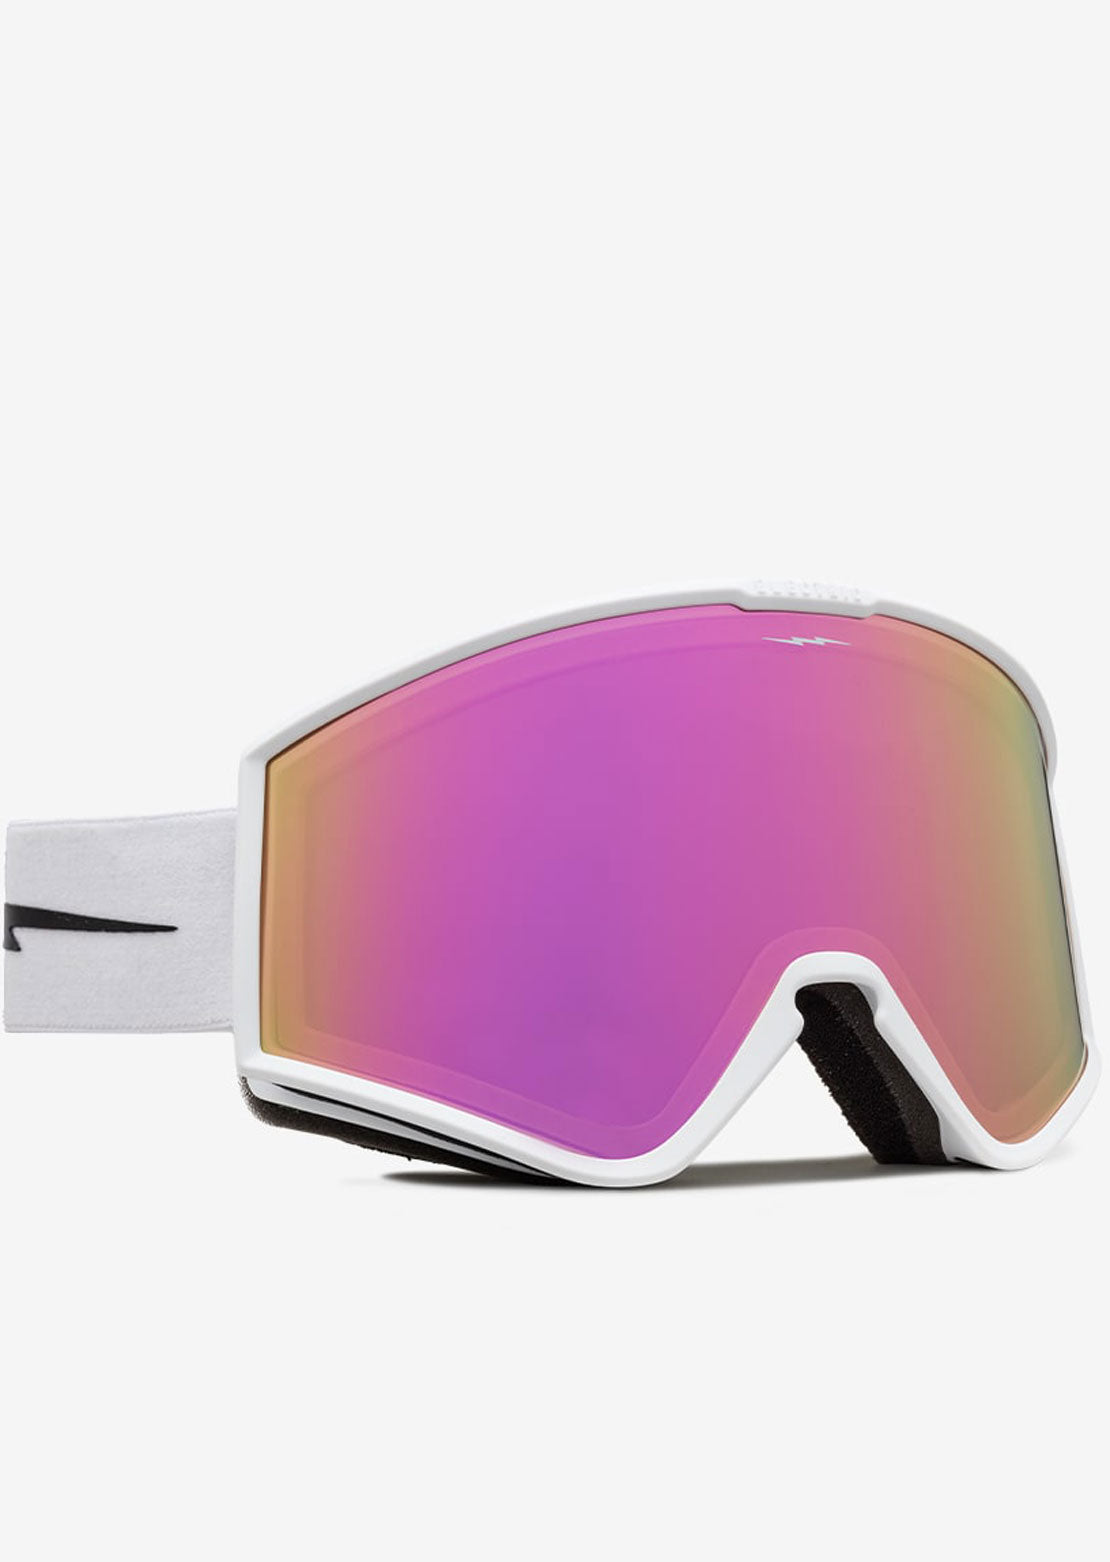 Electric Kleveland Snow Goggles Matte White/Coyote Pink